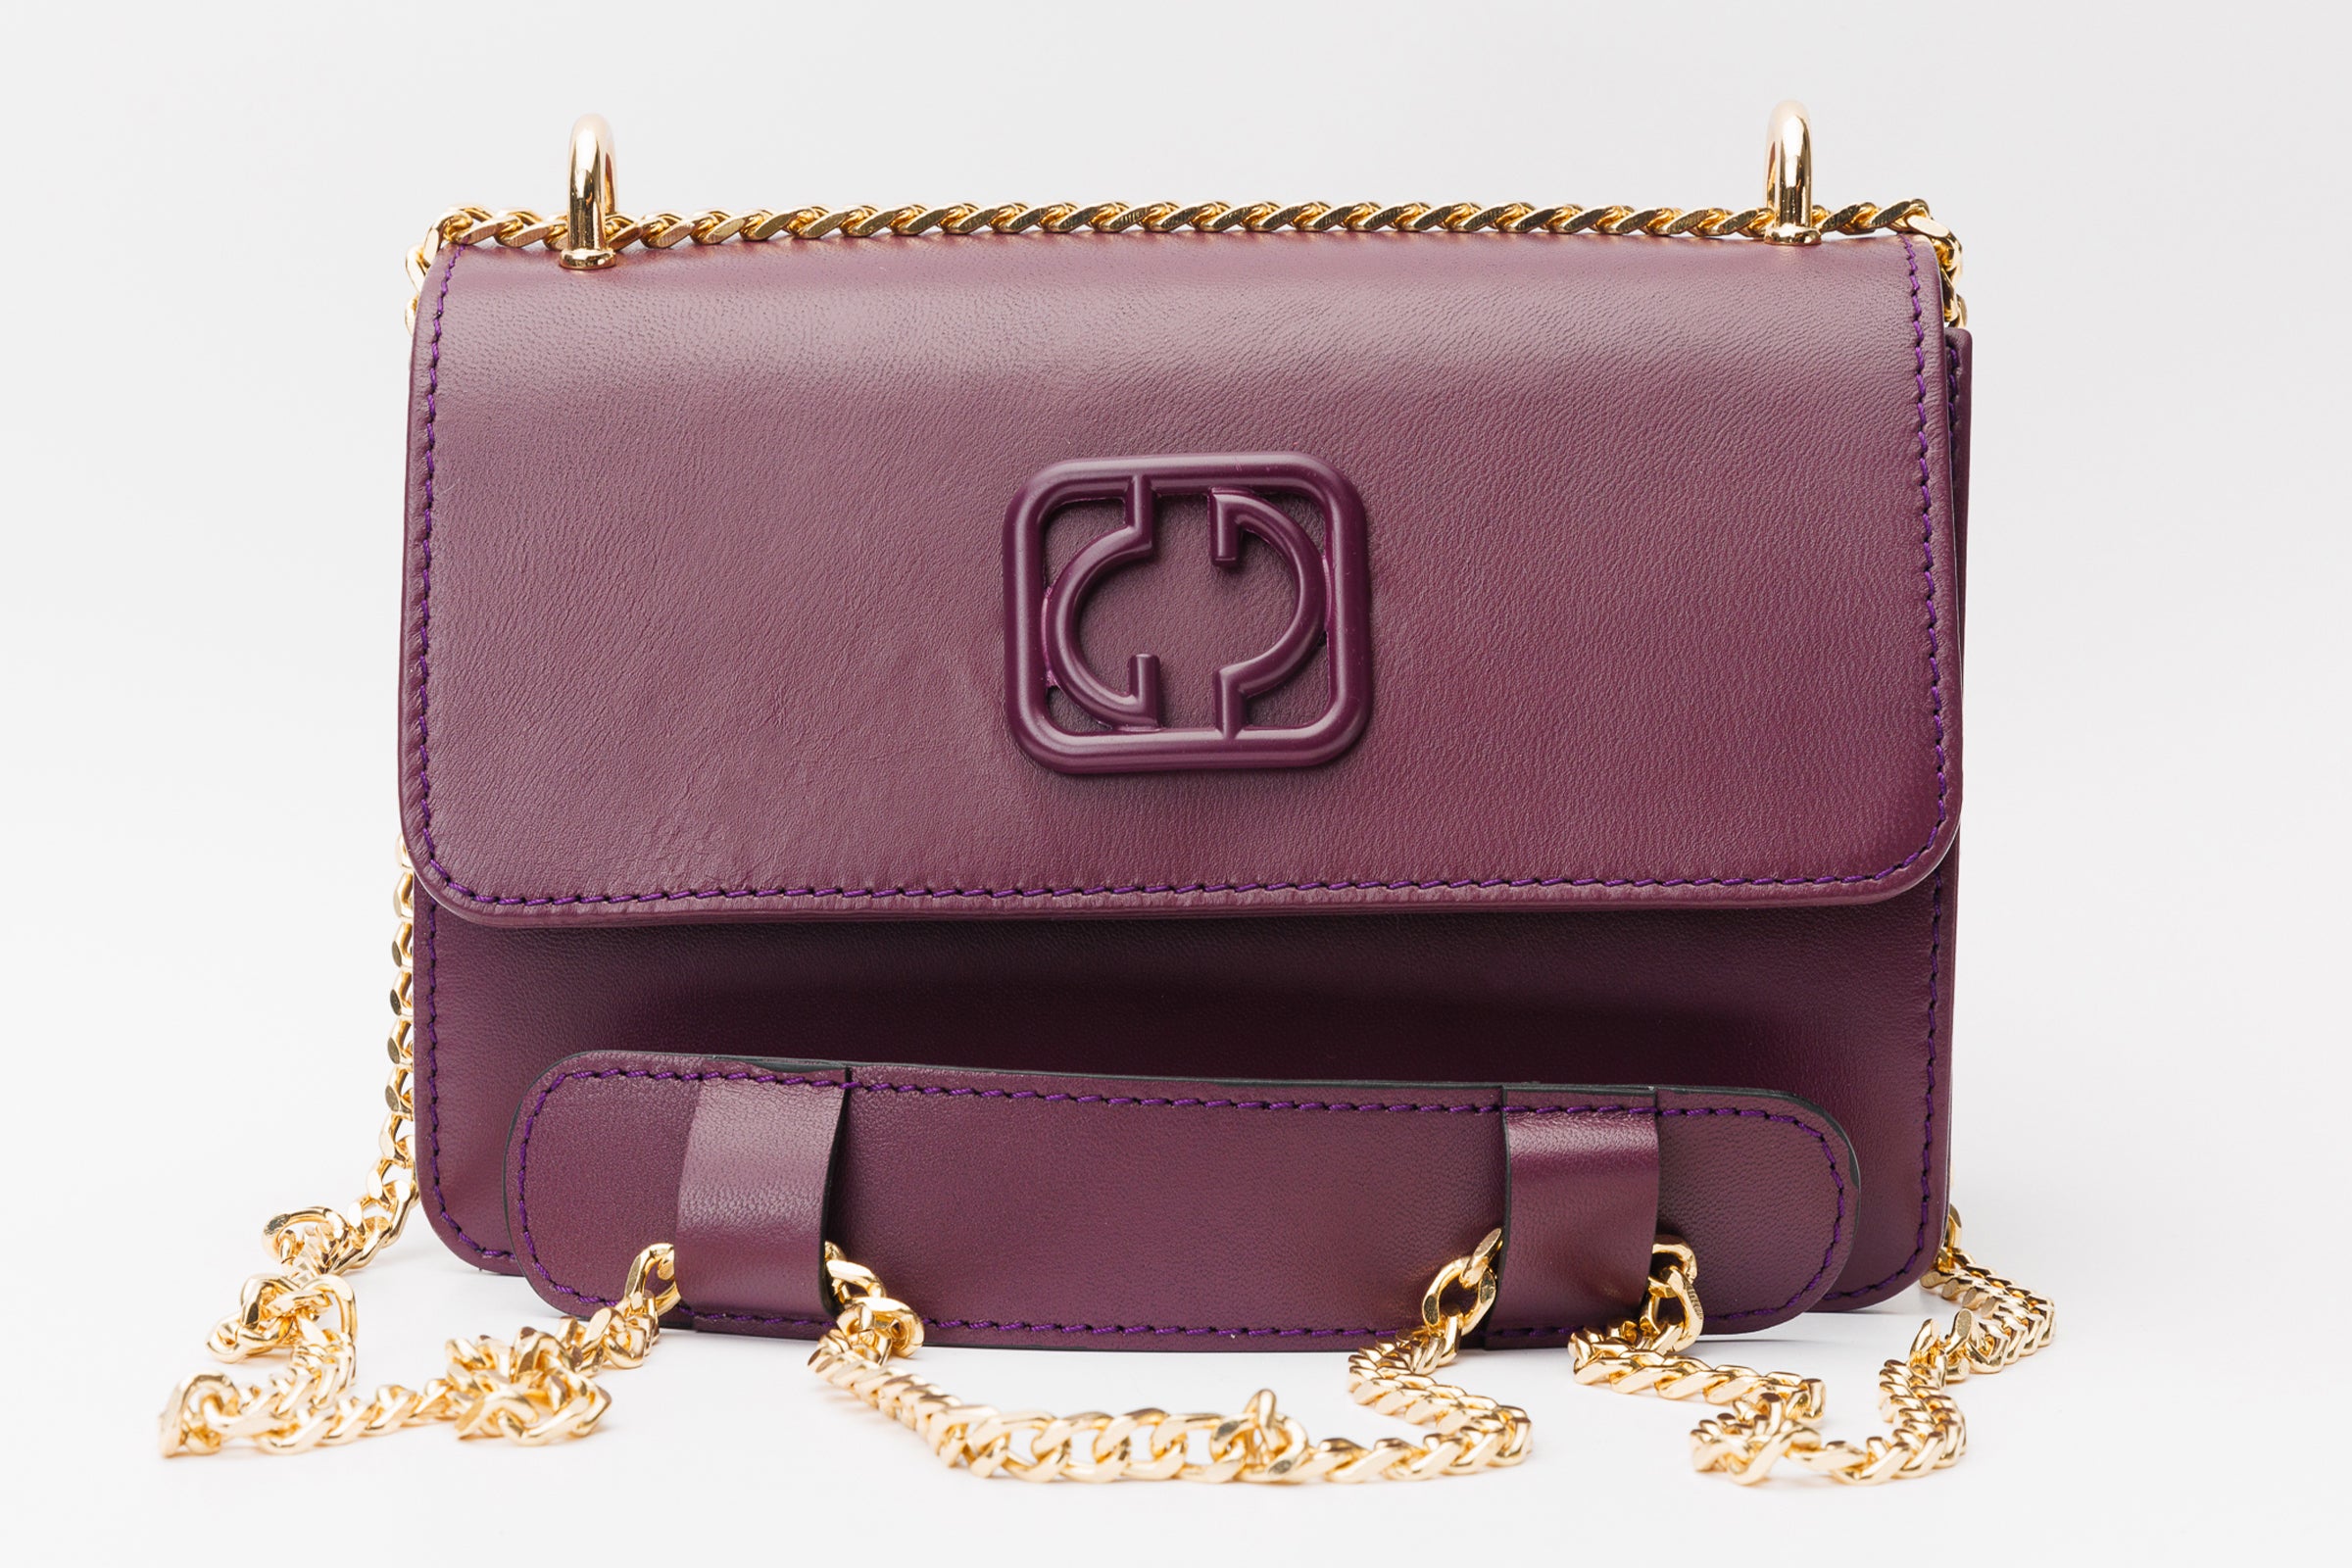 Guias Purple Leather Purse - general for sale - by owner - craigslist